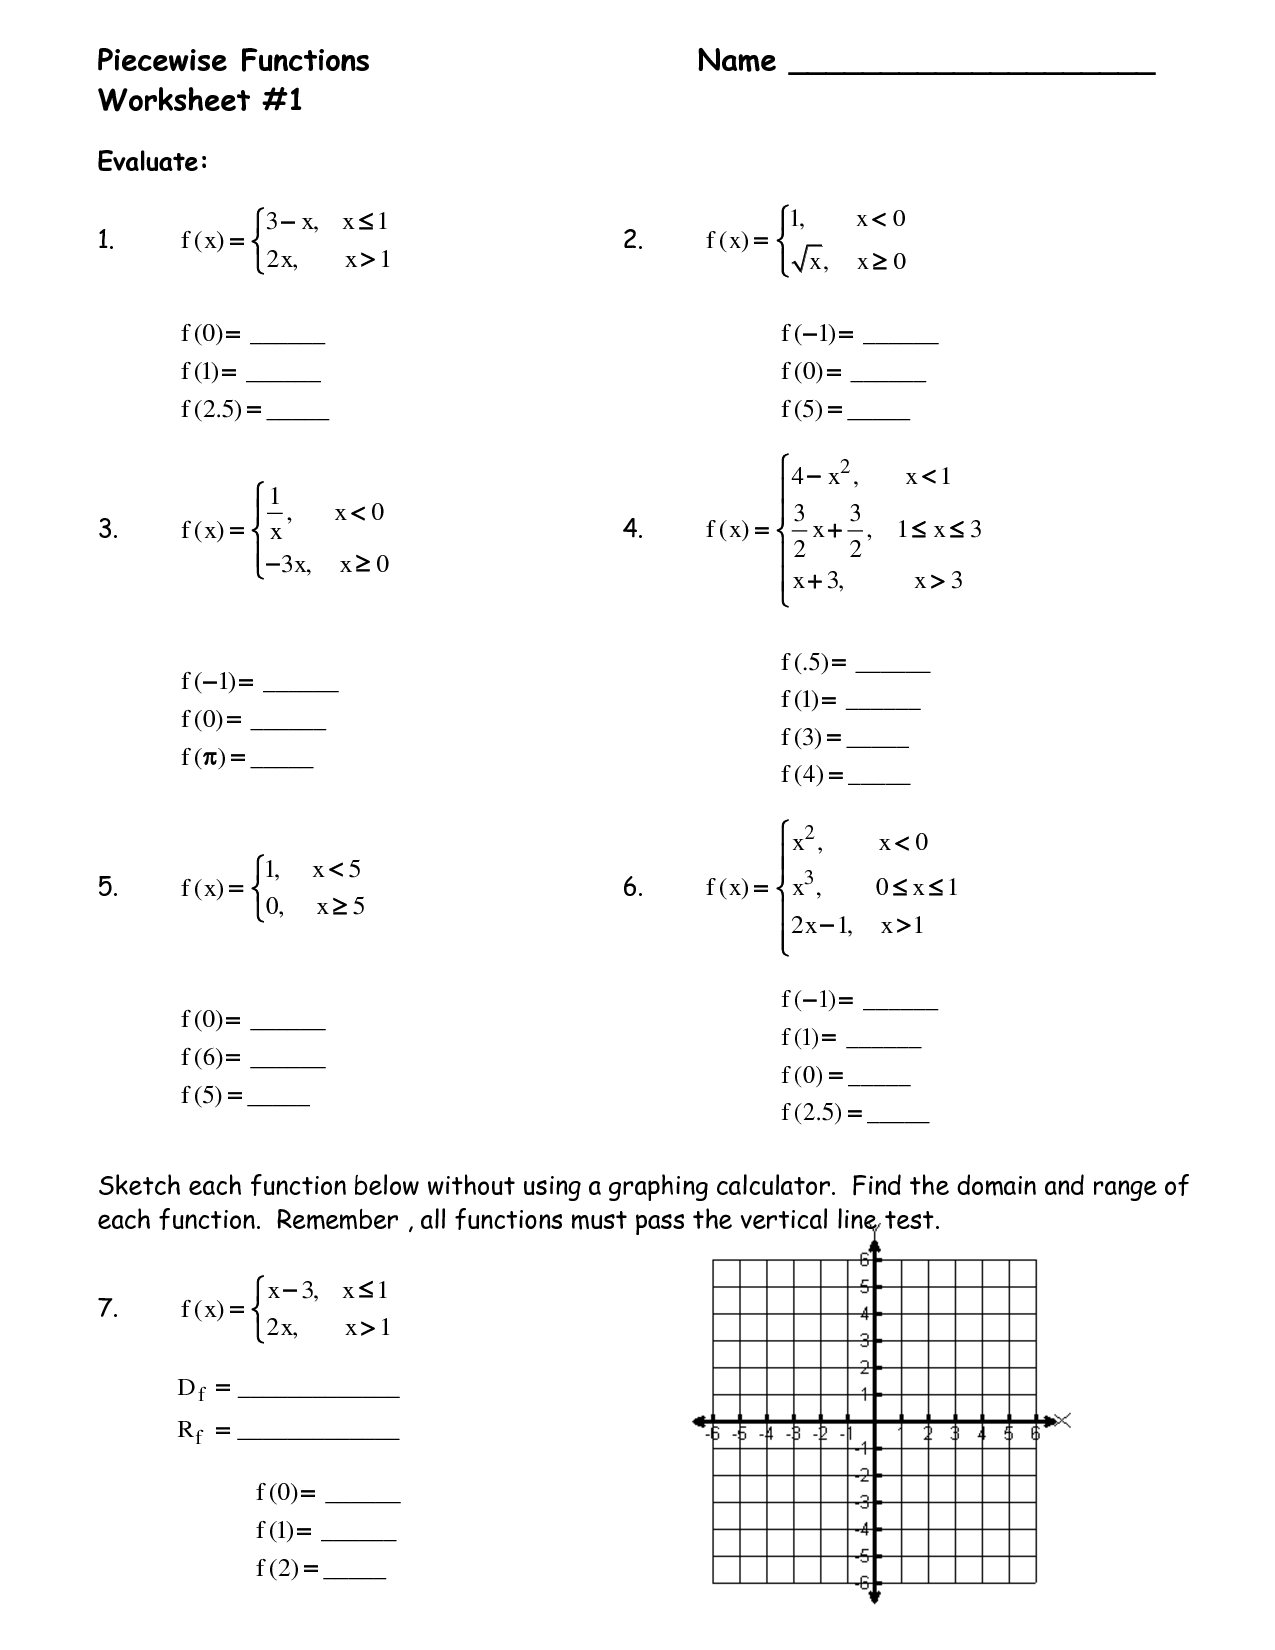 10-best-images-of-algebra-2-piecewise-function-worksheets-piecewise-functions-worksheet-graph